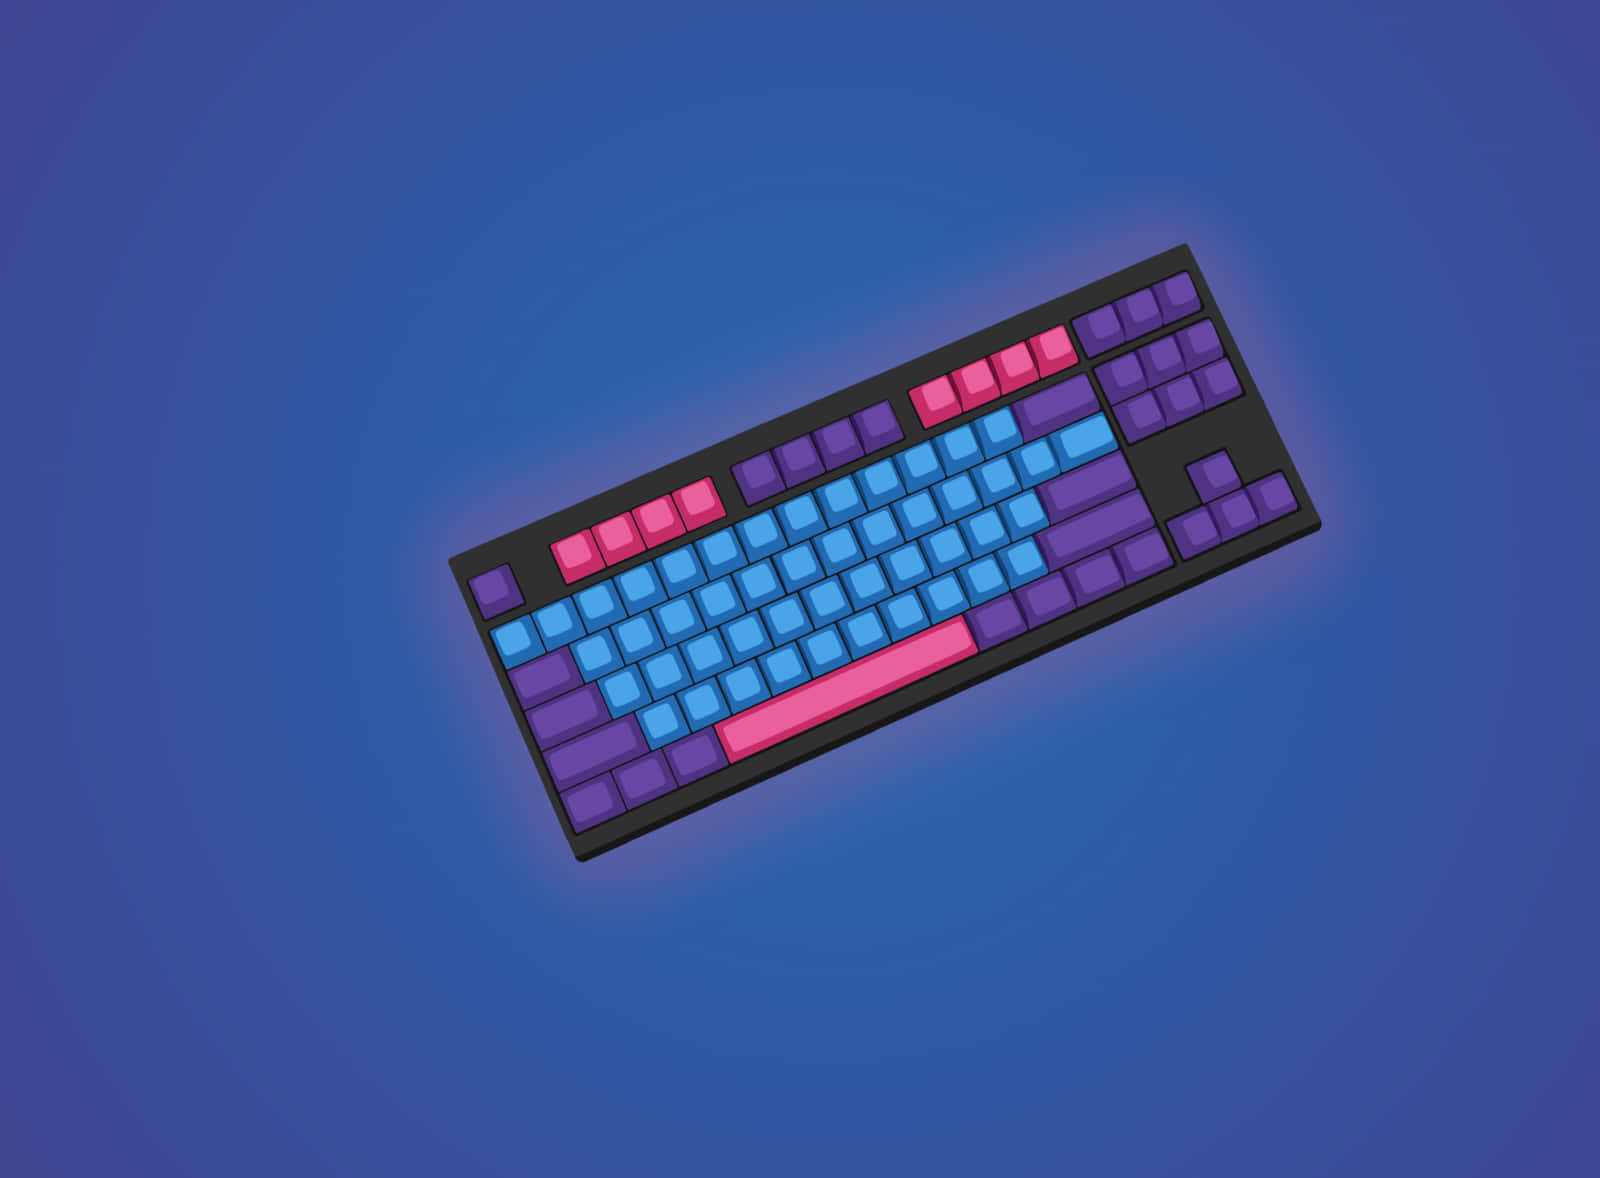 A Computer Keyboard With Blue And Pink Keys